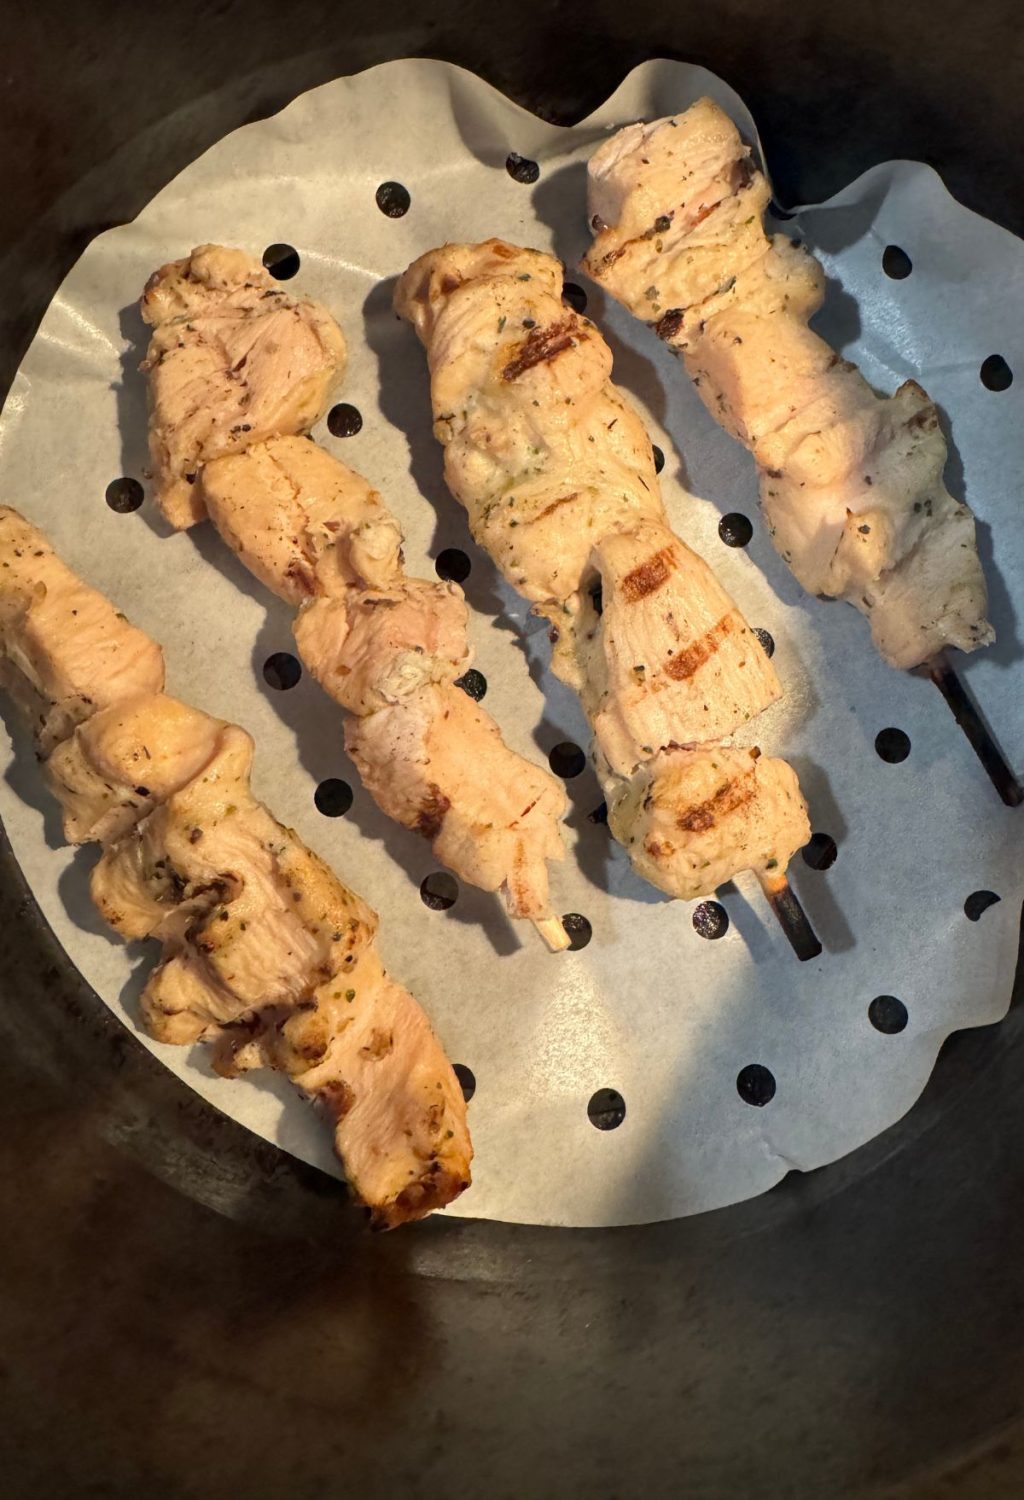 Costco Grilled Chicken Strips on a baking sheet.